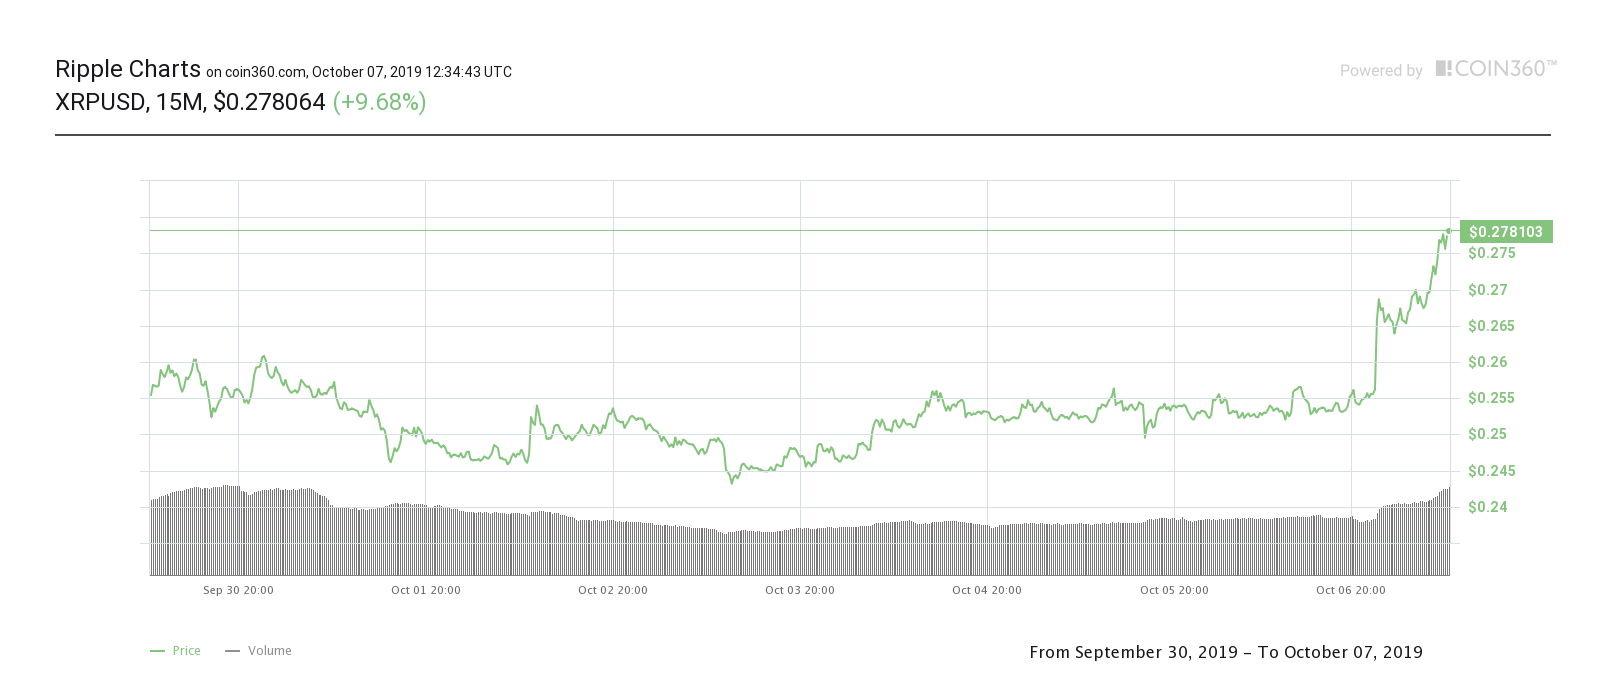 Ripple seven-day price chart. Source: Coin360